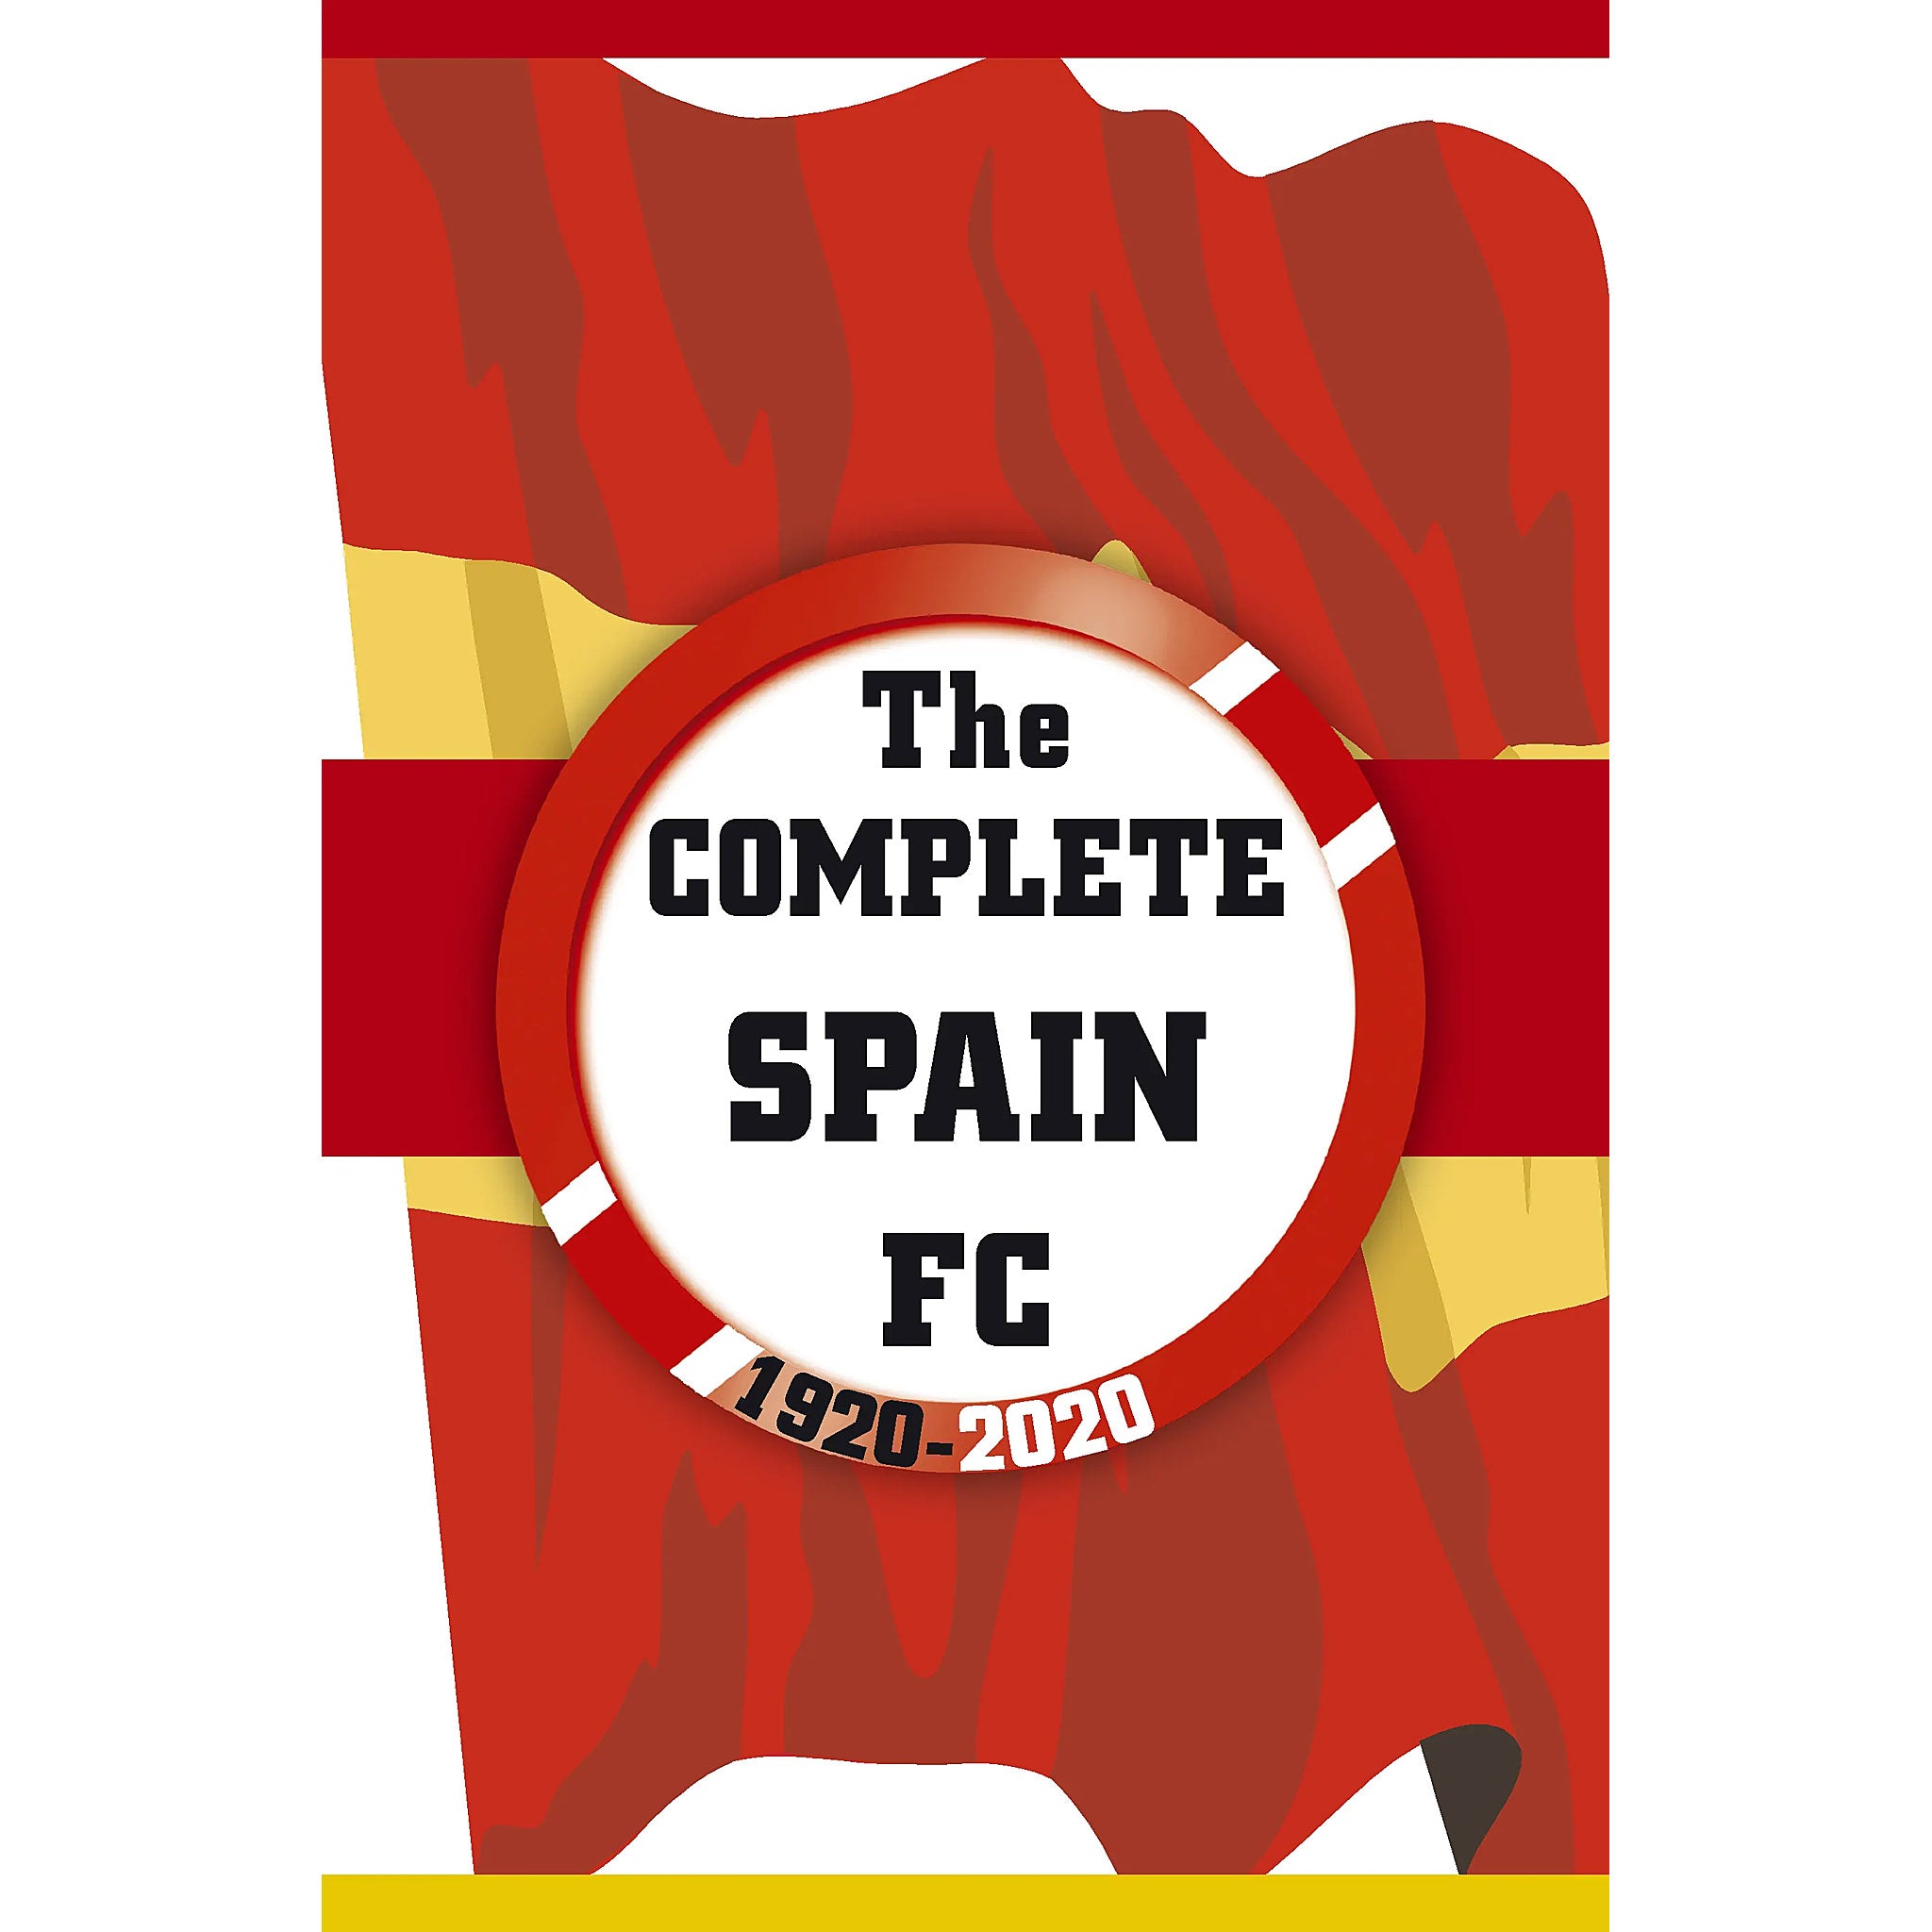 The Complete Spain FC 1920-2020